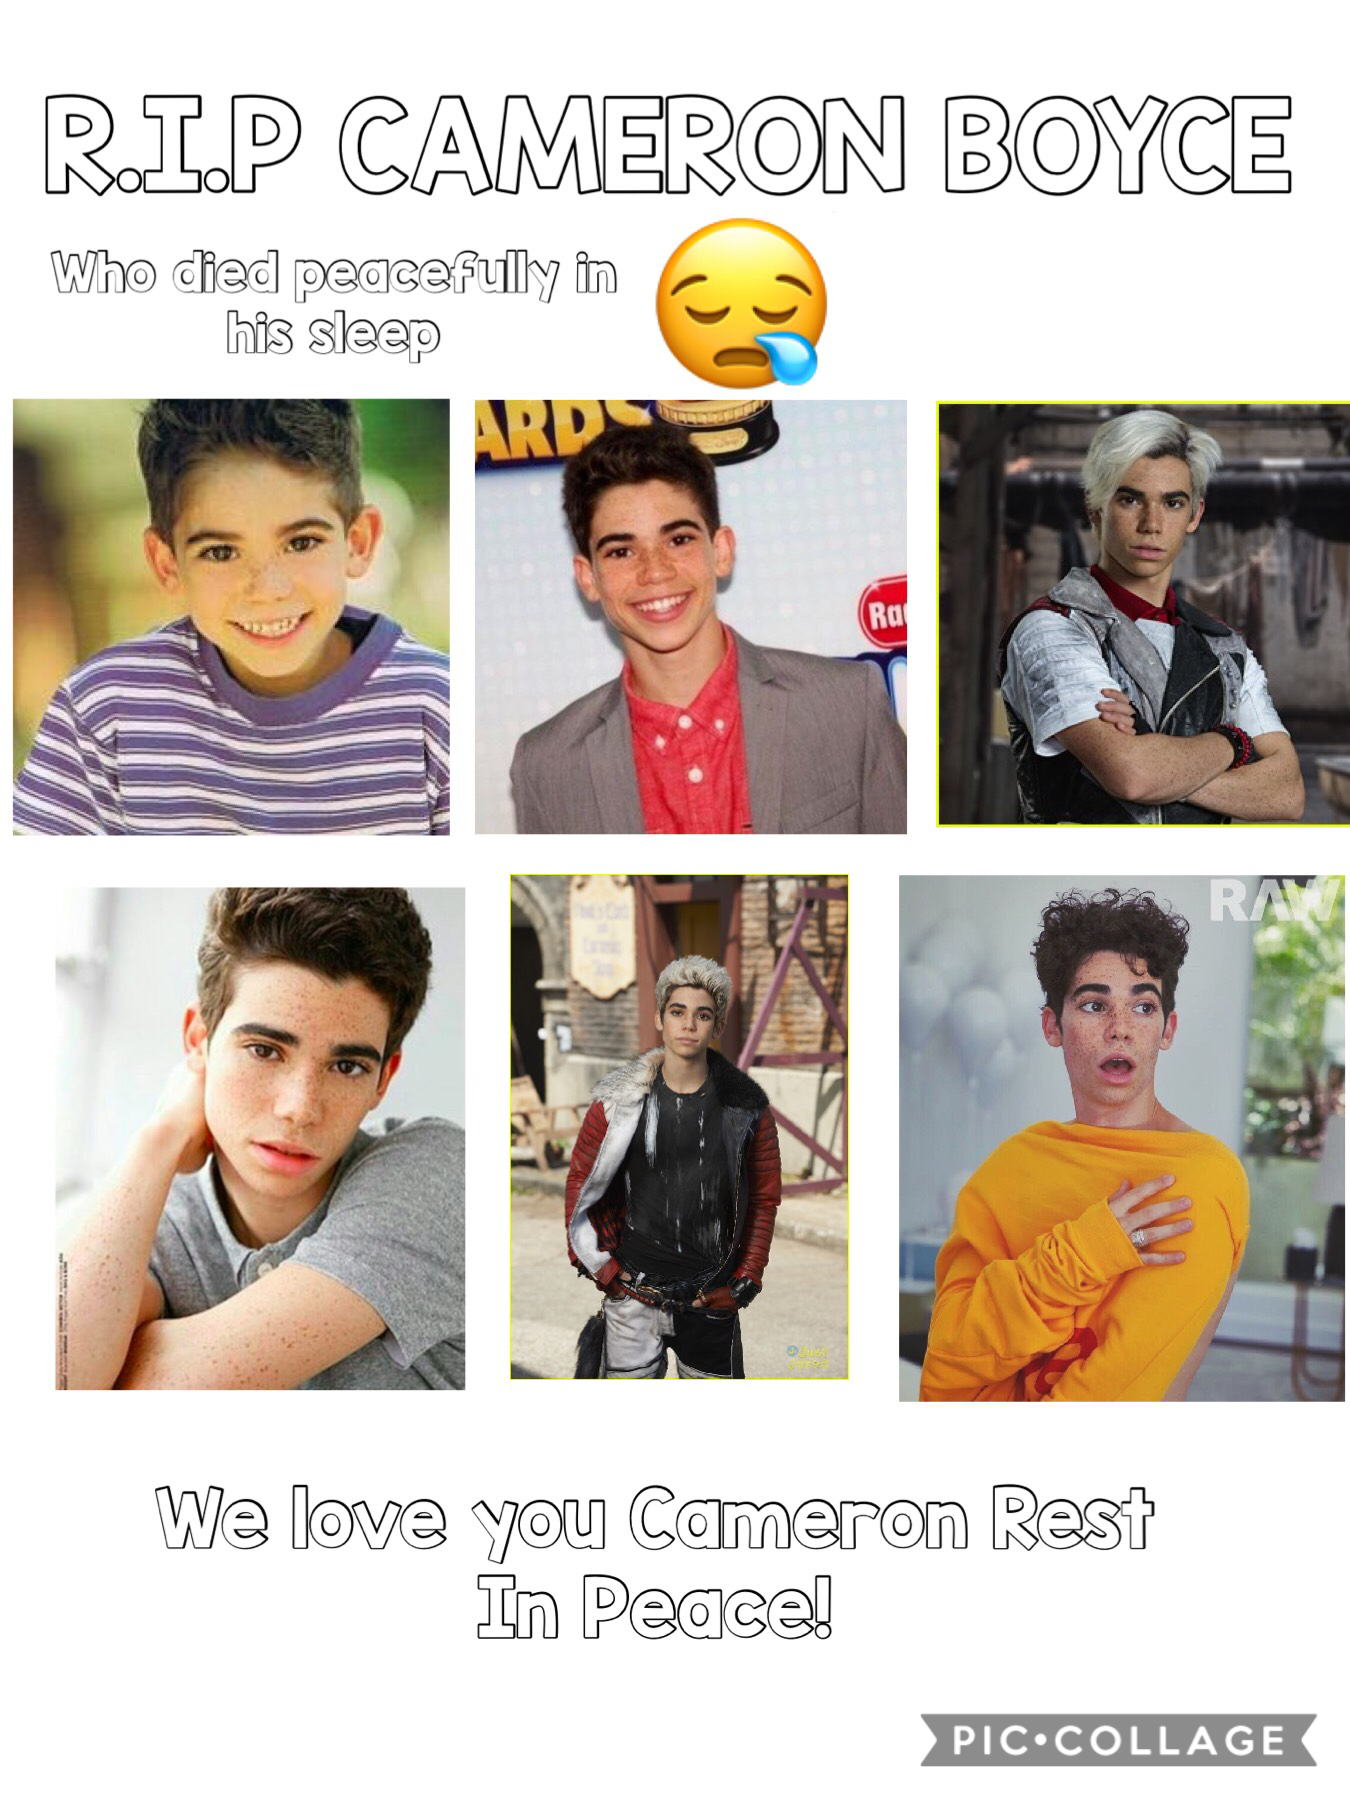 Rip the best actor Cameron Boyce 
Let’s all like to appreciate this amazing guy